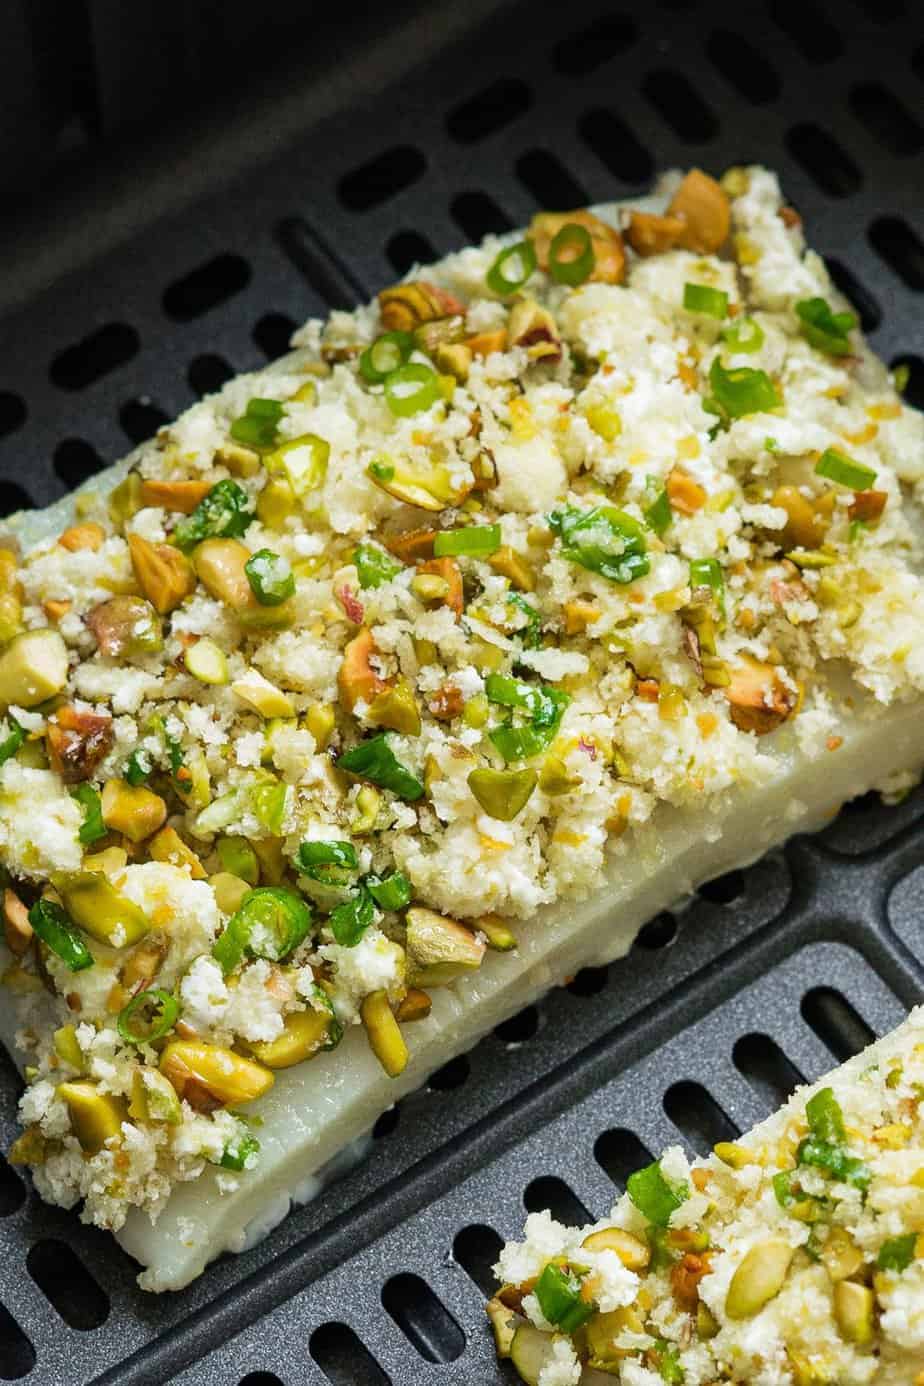 halibut fillets seasoned and cover with a pistachios crust.